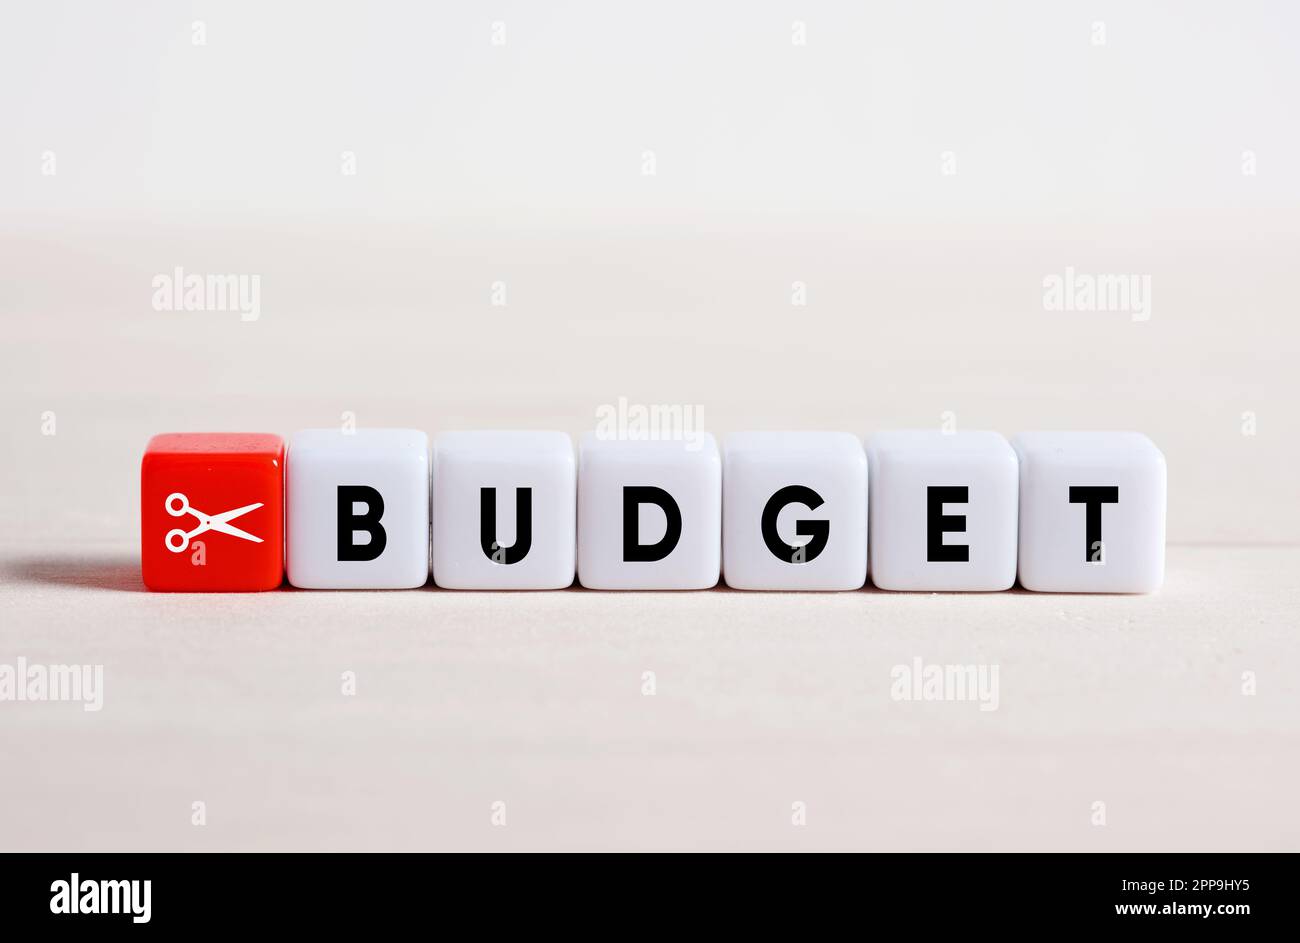 Budget cut concept. Expense reduction and financial stability. Reducing family budget. Cutting spendings. Scissors icon and the word budget on cubes. Stock Photo